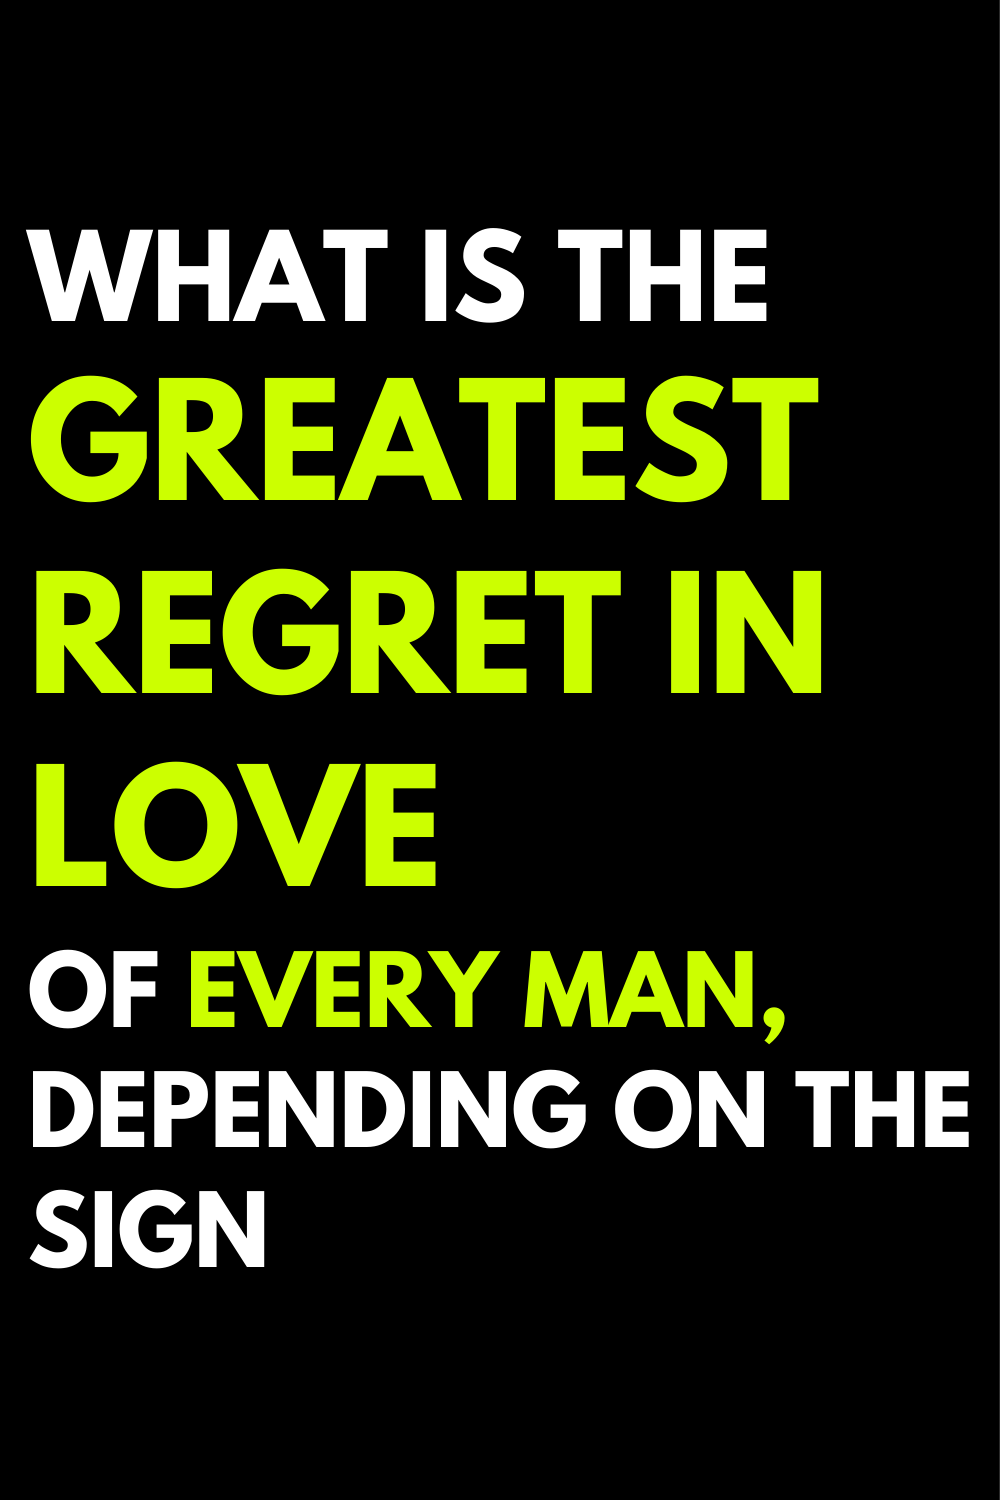 What is the greatest regret in love of every man, depending on the sign